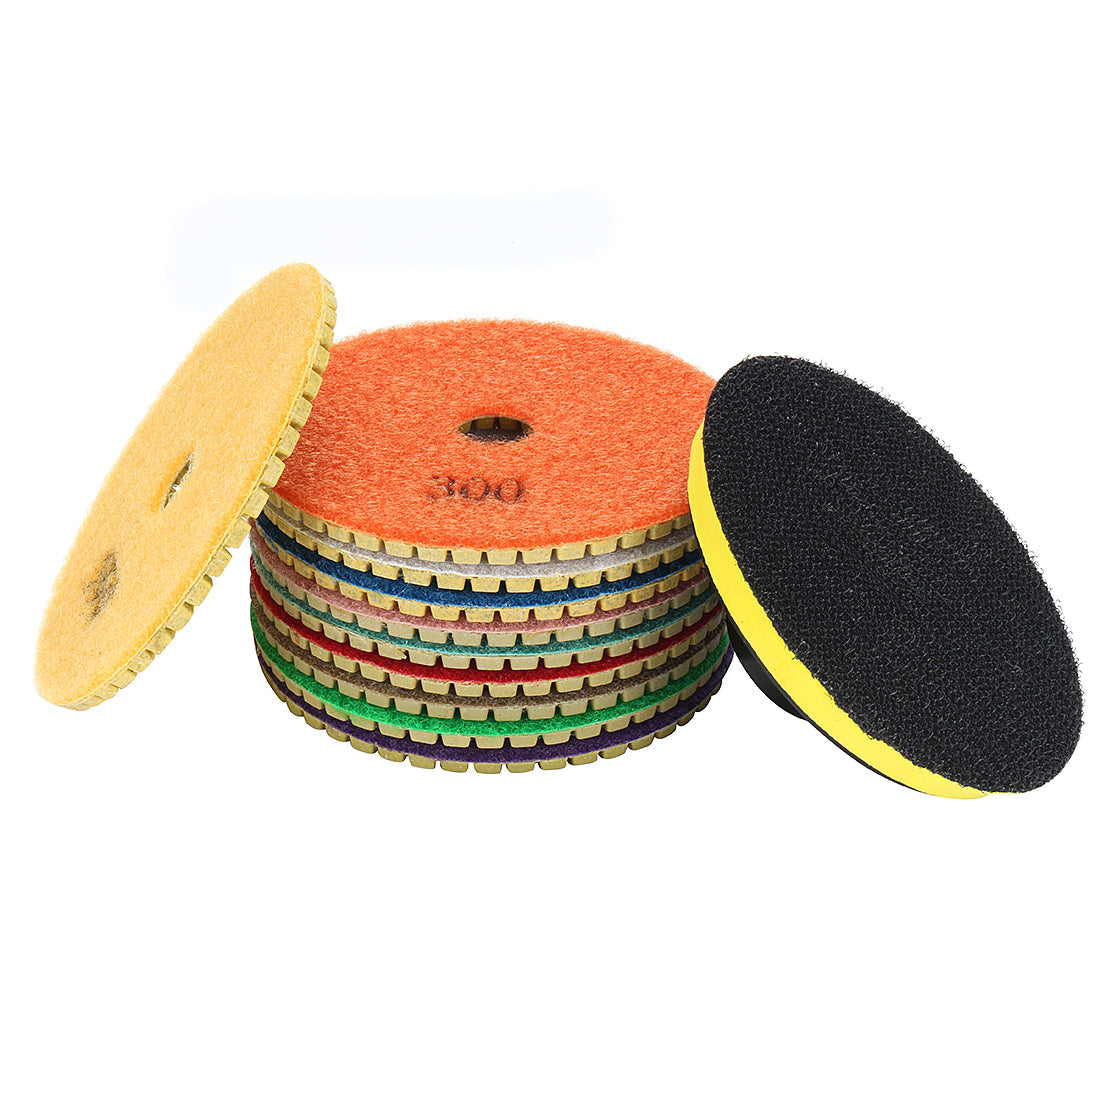 uxcell Uxcell 4-inch Diamond Wet Polishing Sanding Grinding Pads 10 in 1 w Rubber Backer Pad